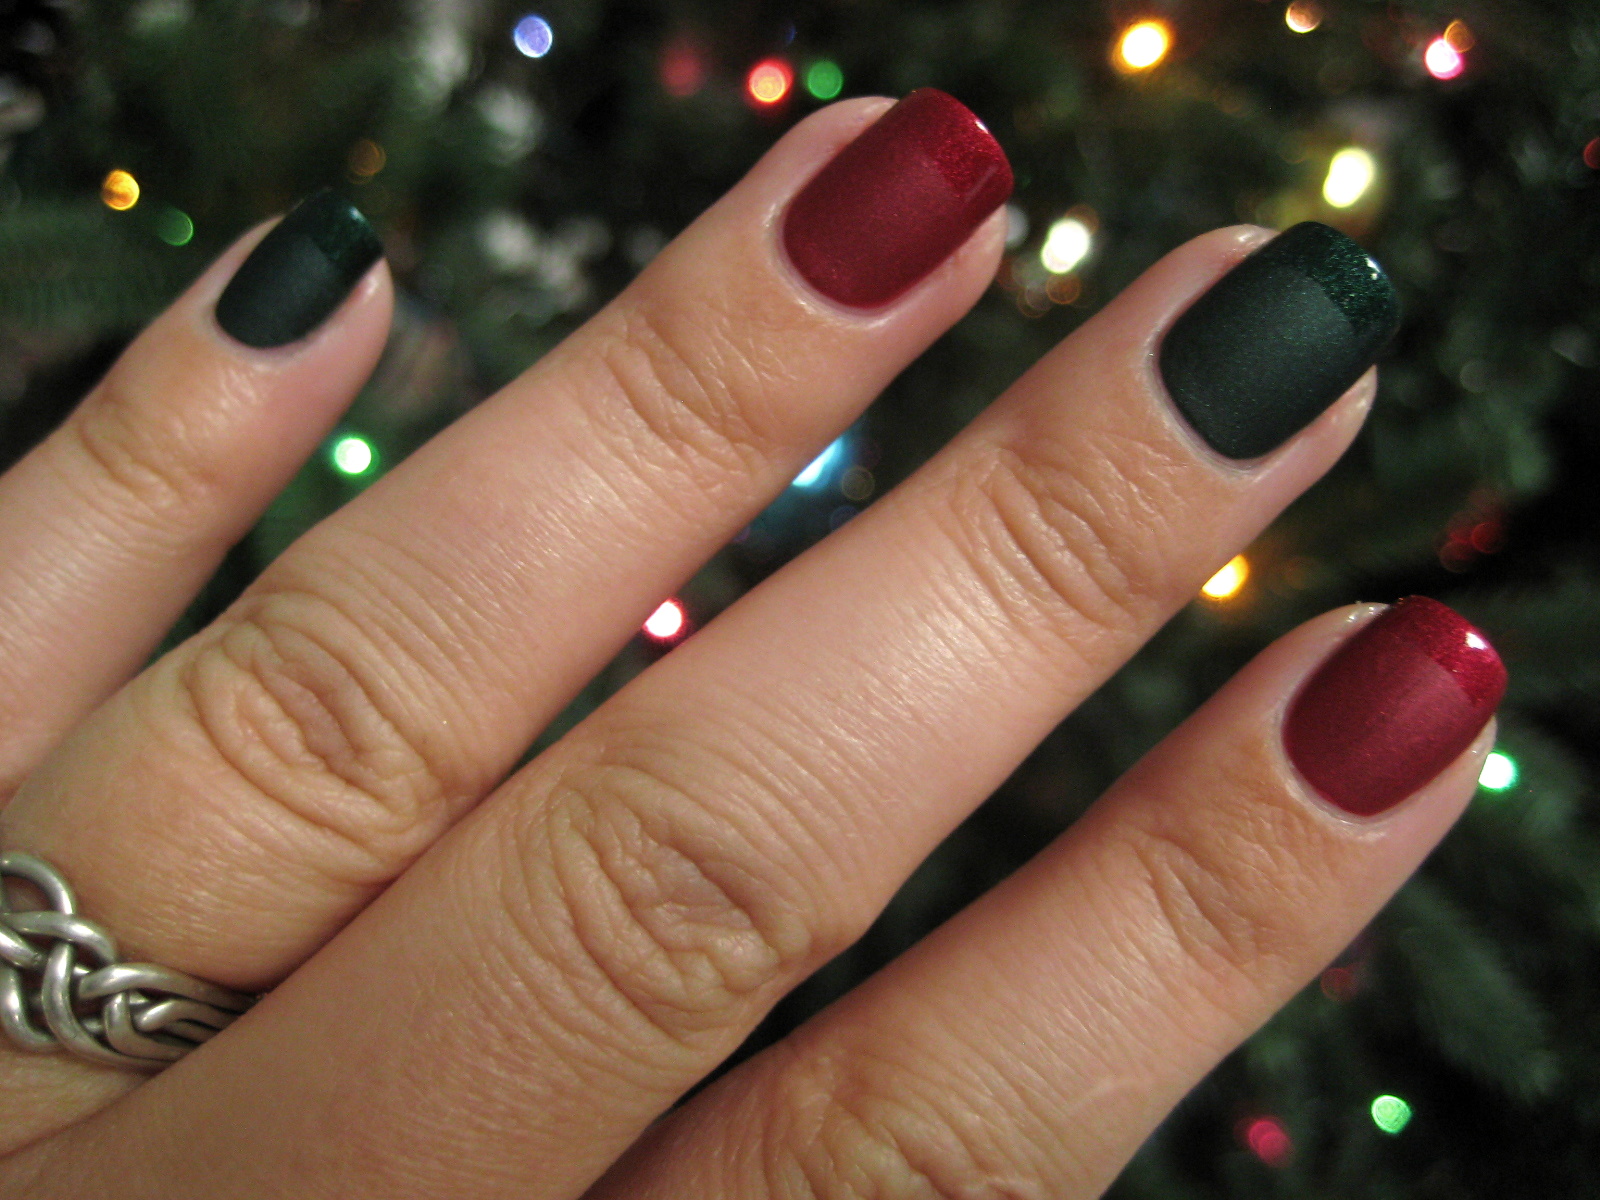 2. Festive Red and Green Ombre Nails - wide 5